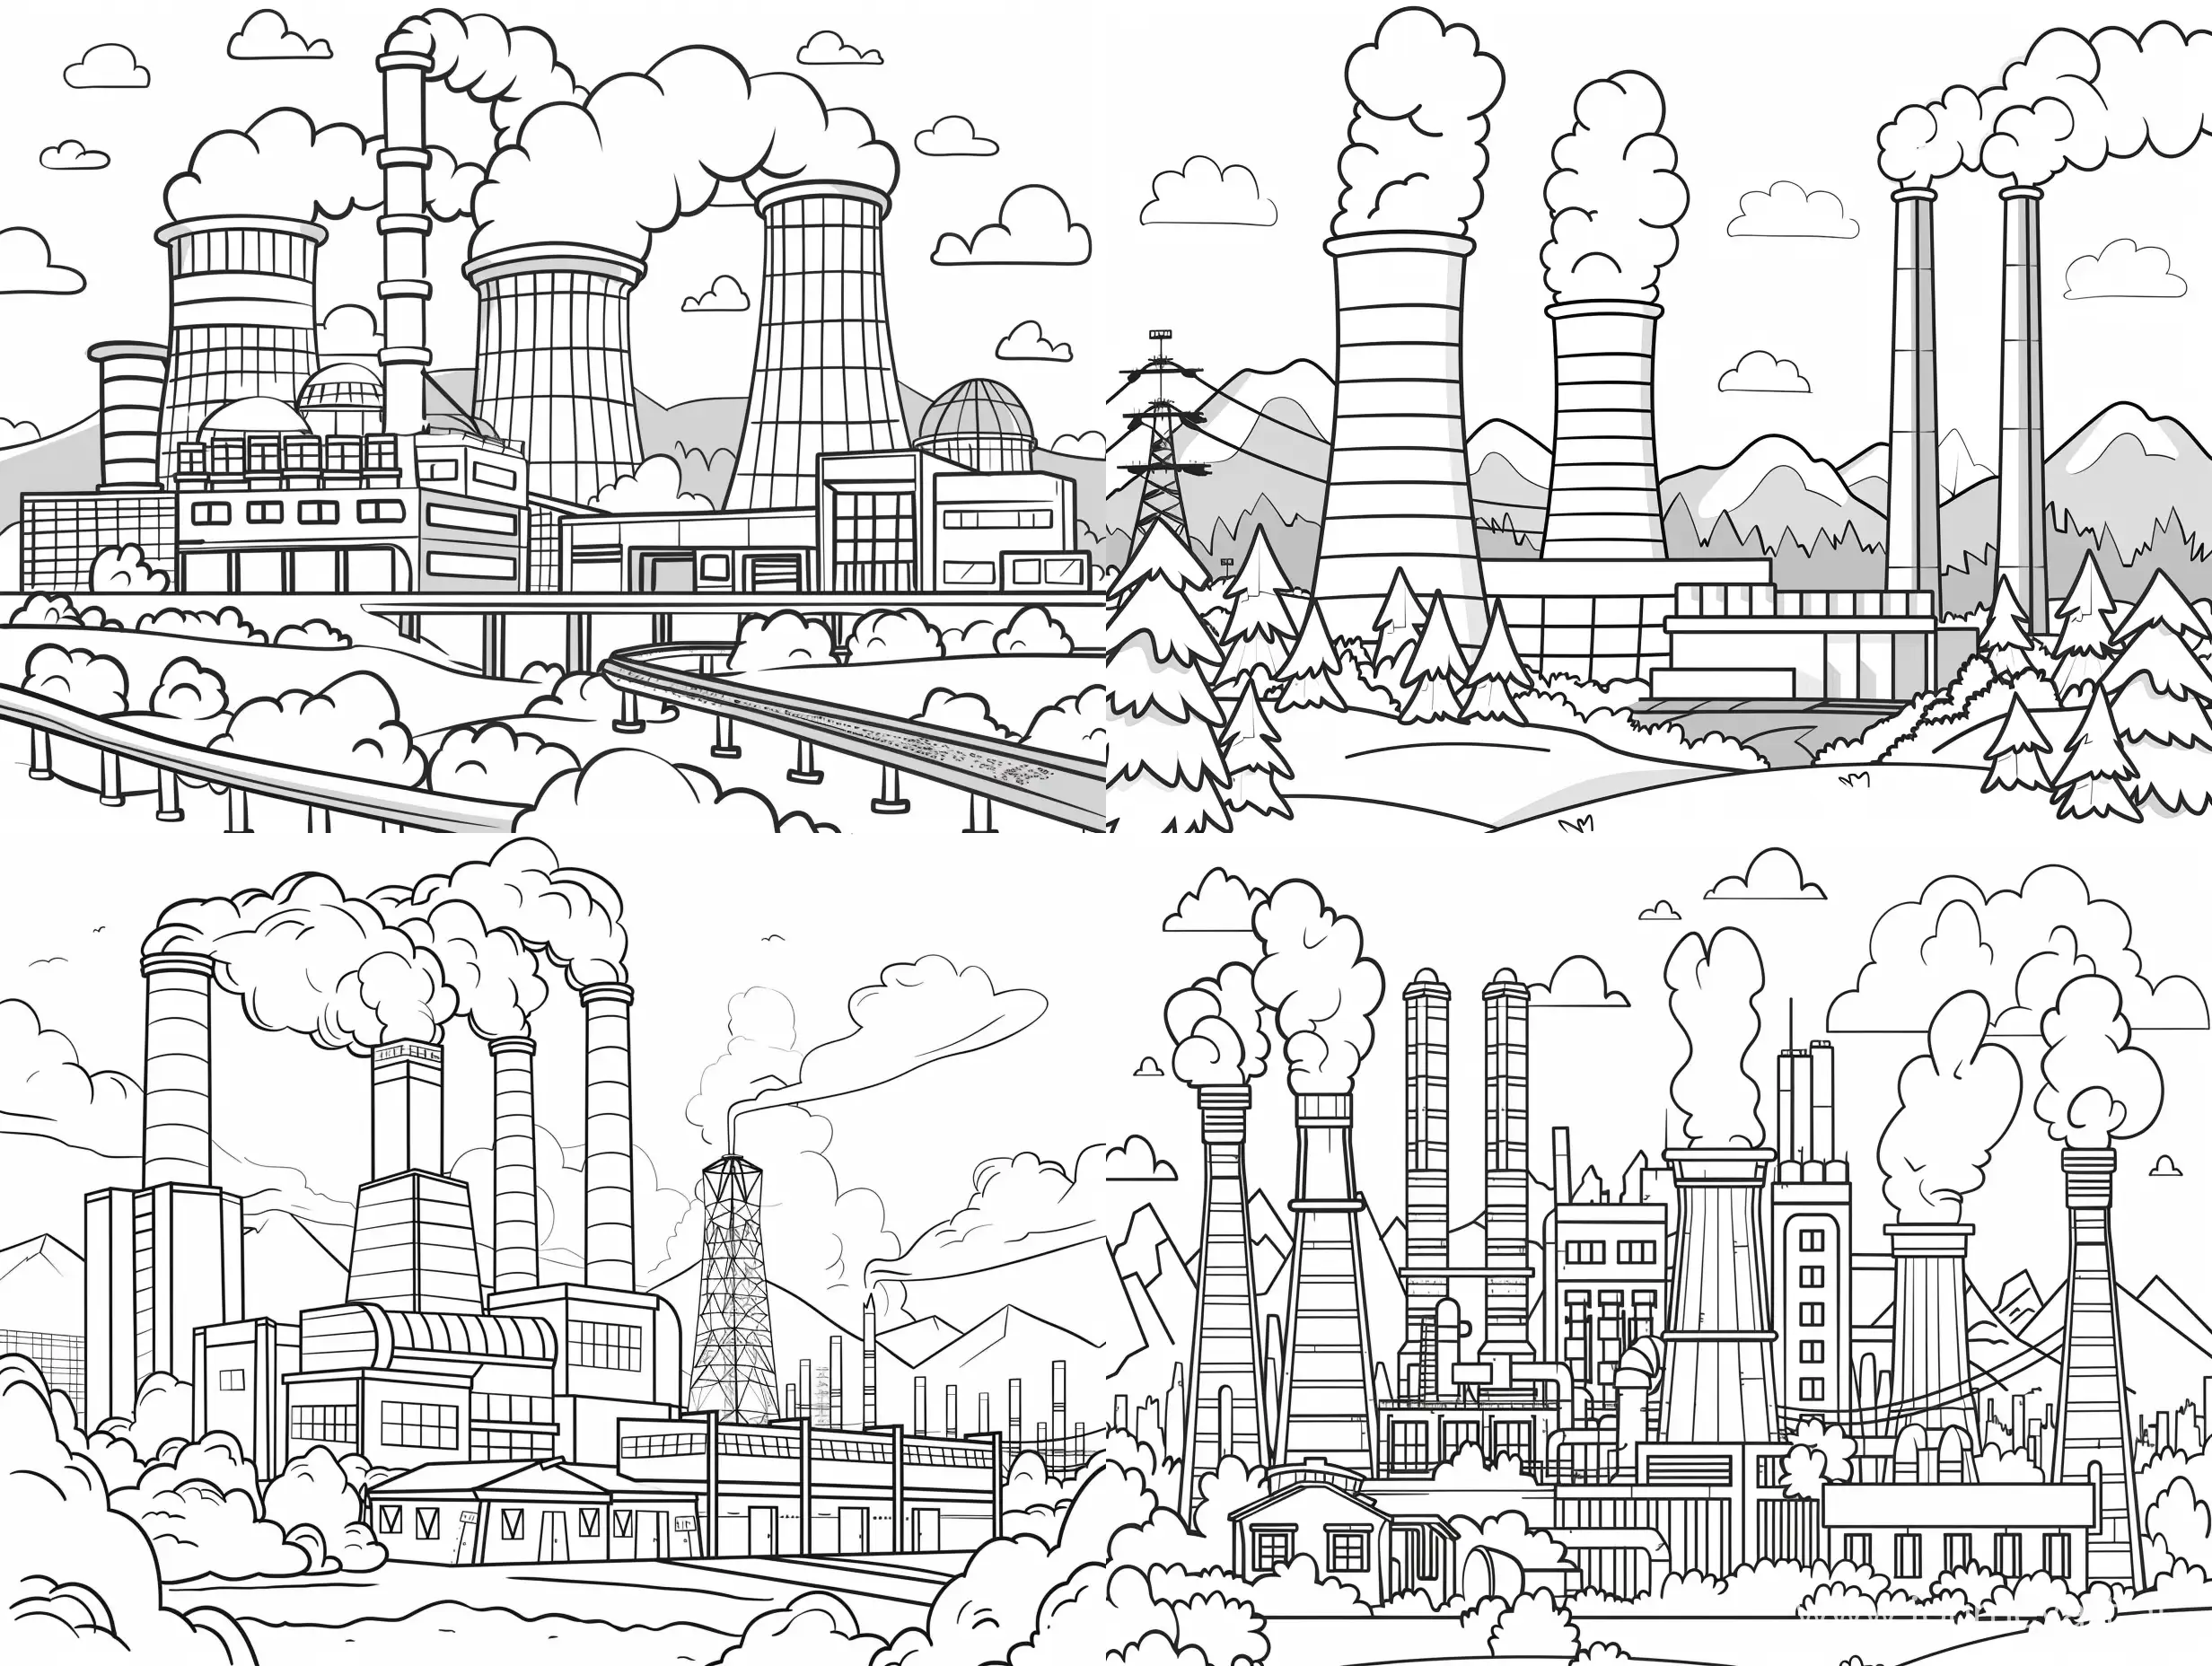 coloring page for kids, detailed, simply cartoon style, isolated, funny, future power station